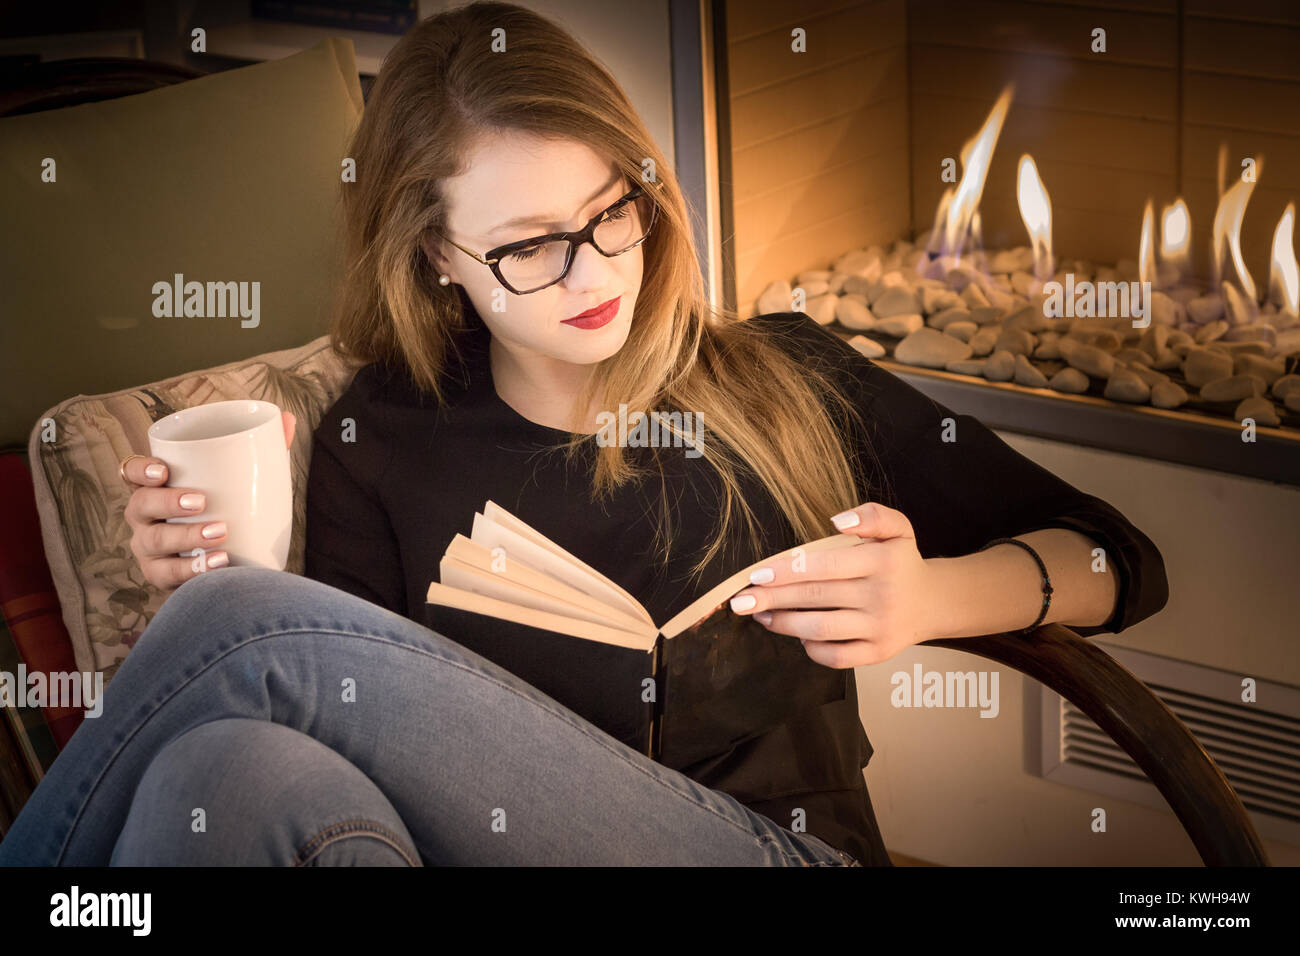 Portrait of a blonde young woman wearing eyeglasses, reading a book, sitting on a rocking chair beside a fireplace and having coffee. Stock Photo